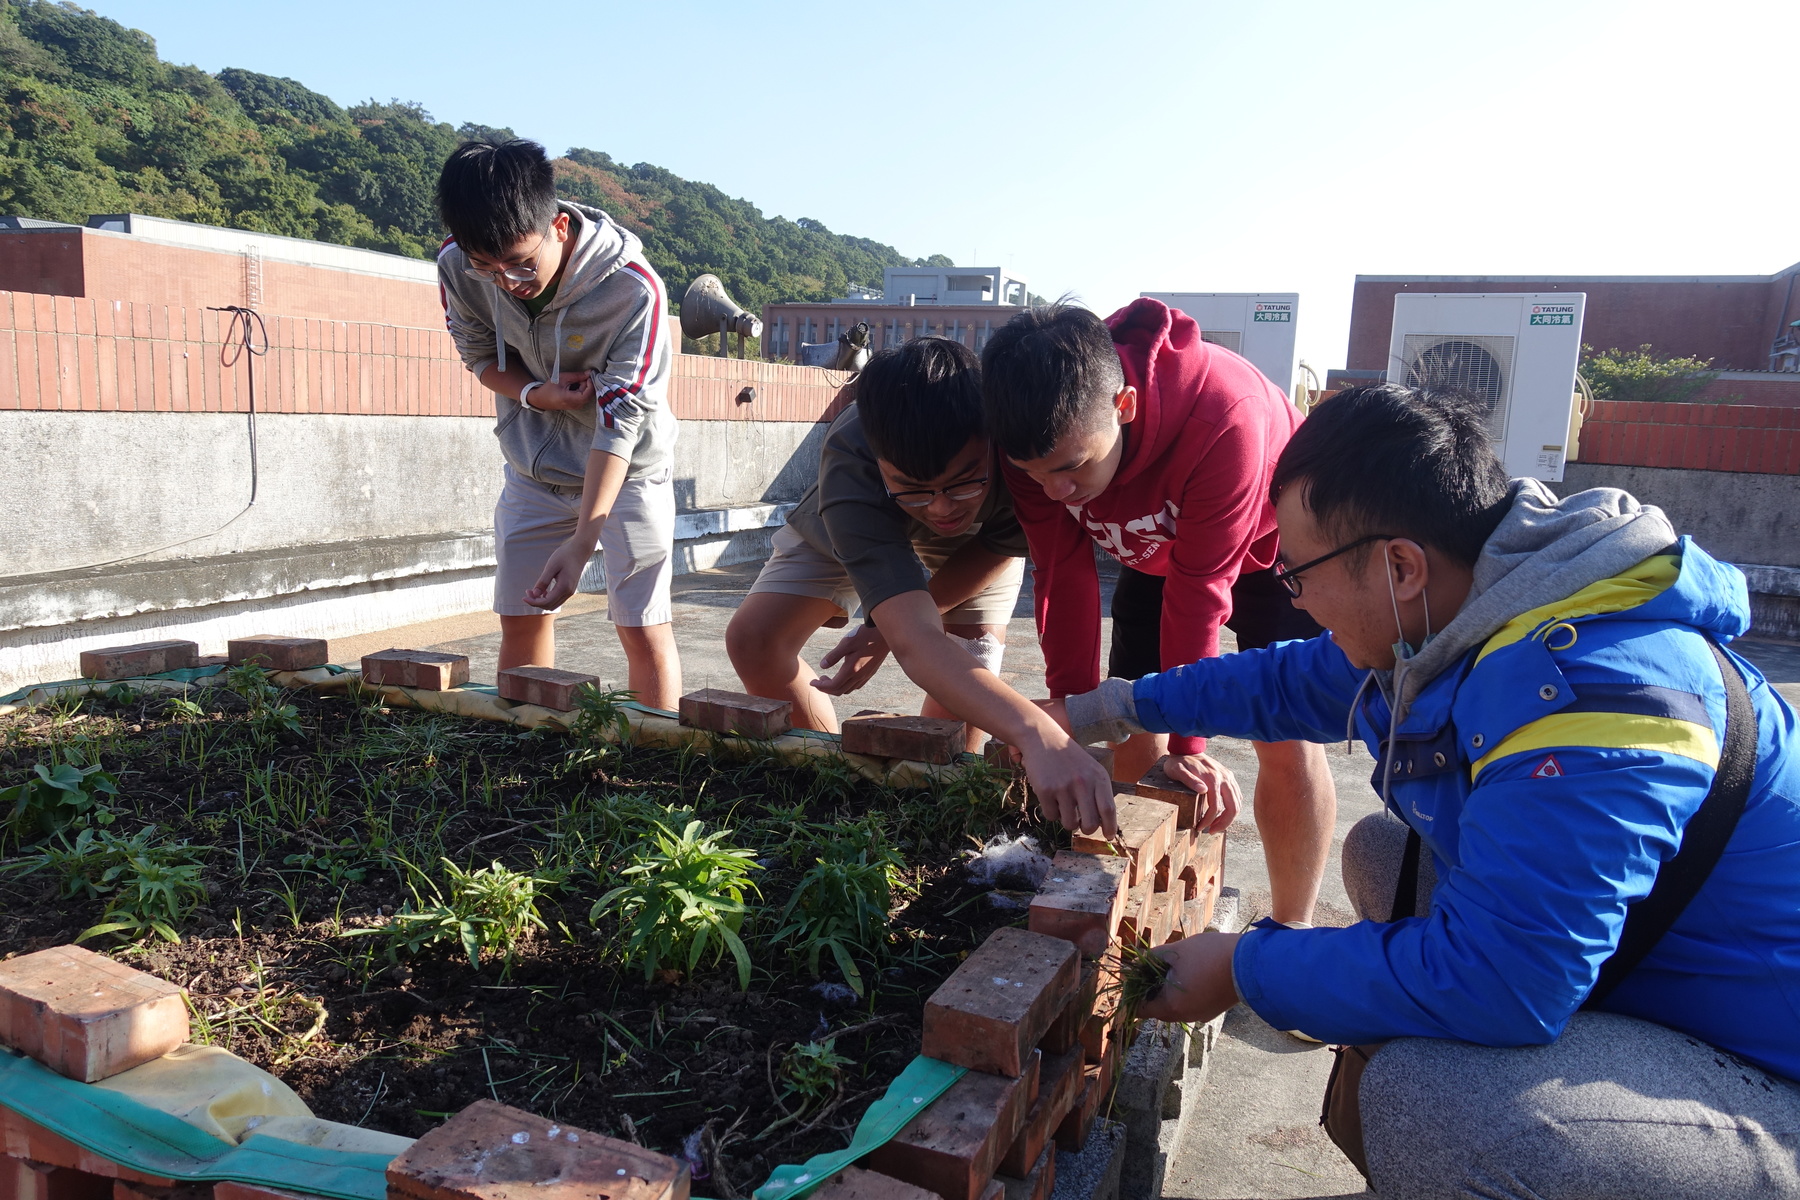 For the past 2 years, the students of the Food and Agriculture Society at NSYSU have been keeping an organic, toxic-free garden on the rooftop of the building of the College of Social Sciences.